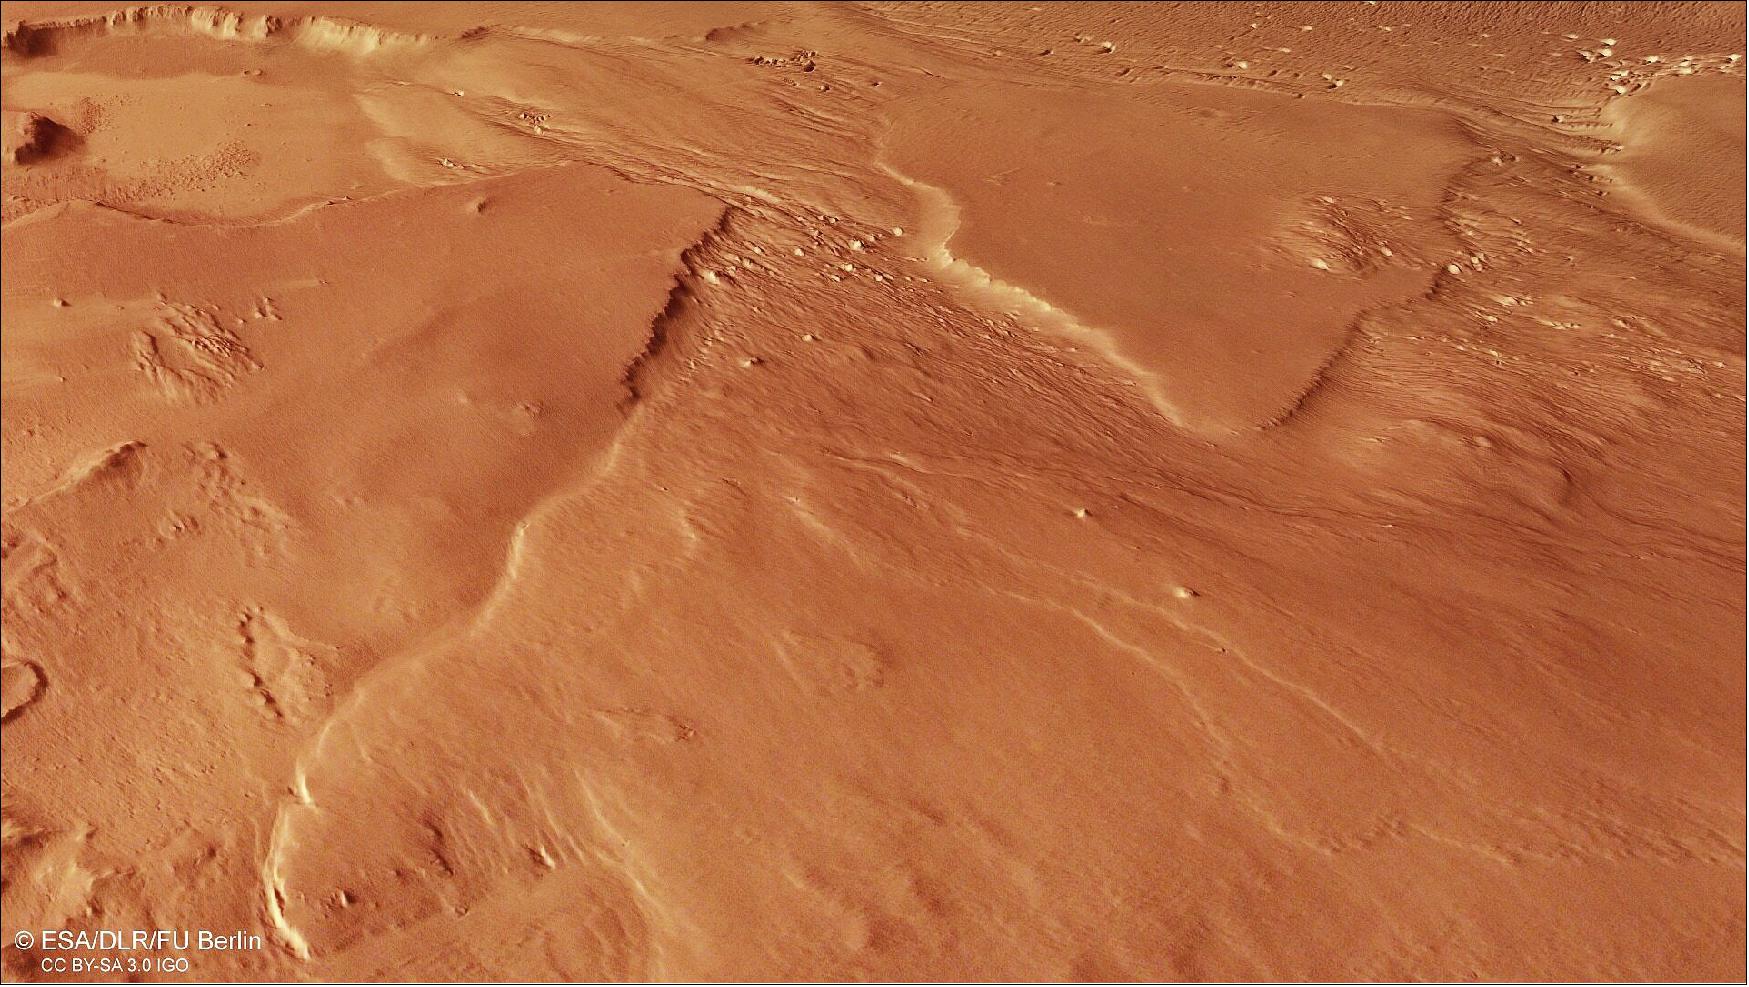 Figure 33: Second perspective view of Medusae Fossae. This oblique perspective view of Medusae Fossae on Mars was generated from the digital terrain model and the nadir and colour channels of the High Resolution Stereo Camera on ESA’s Mars Express (image credit: ESA/DLR/FU Berlin, CC BY-SA 3.0 IGO)